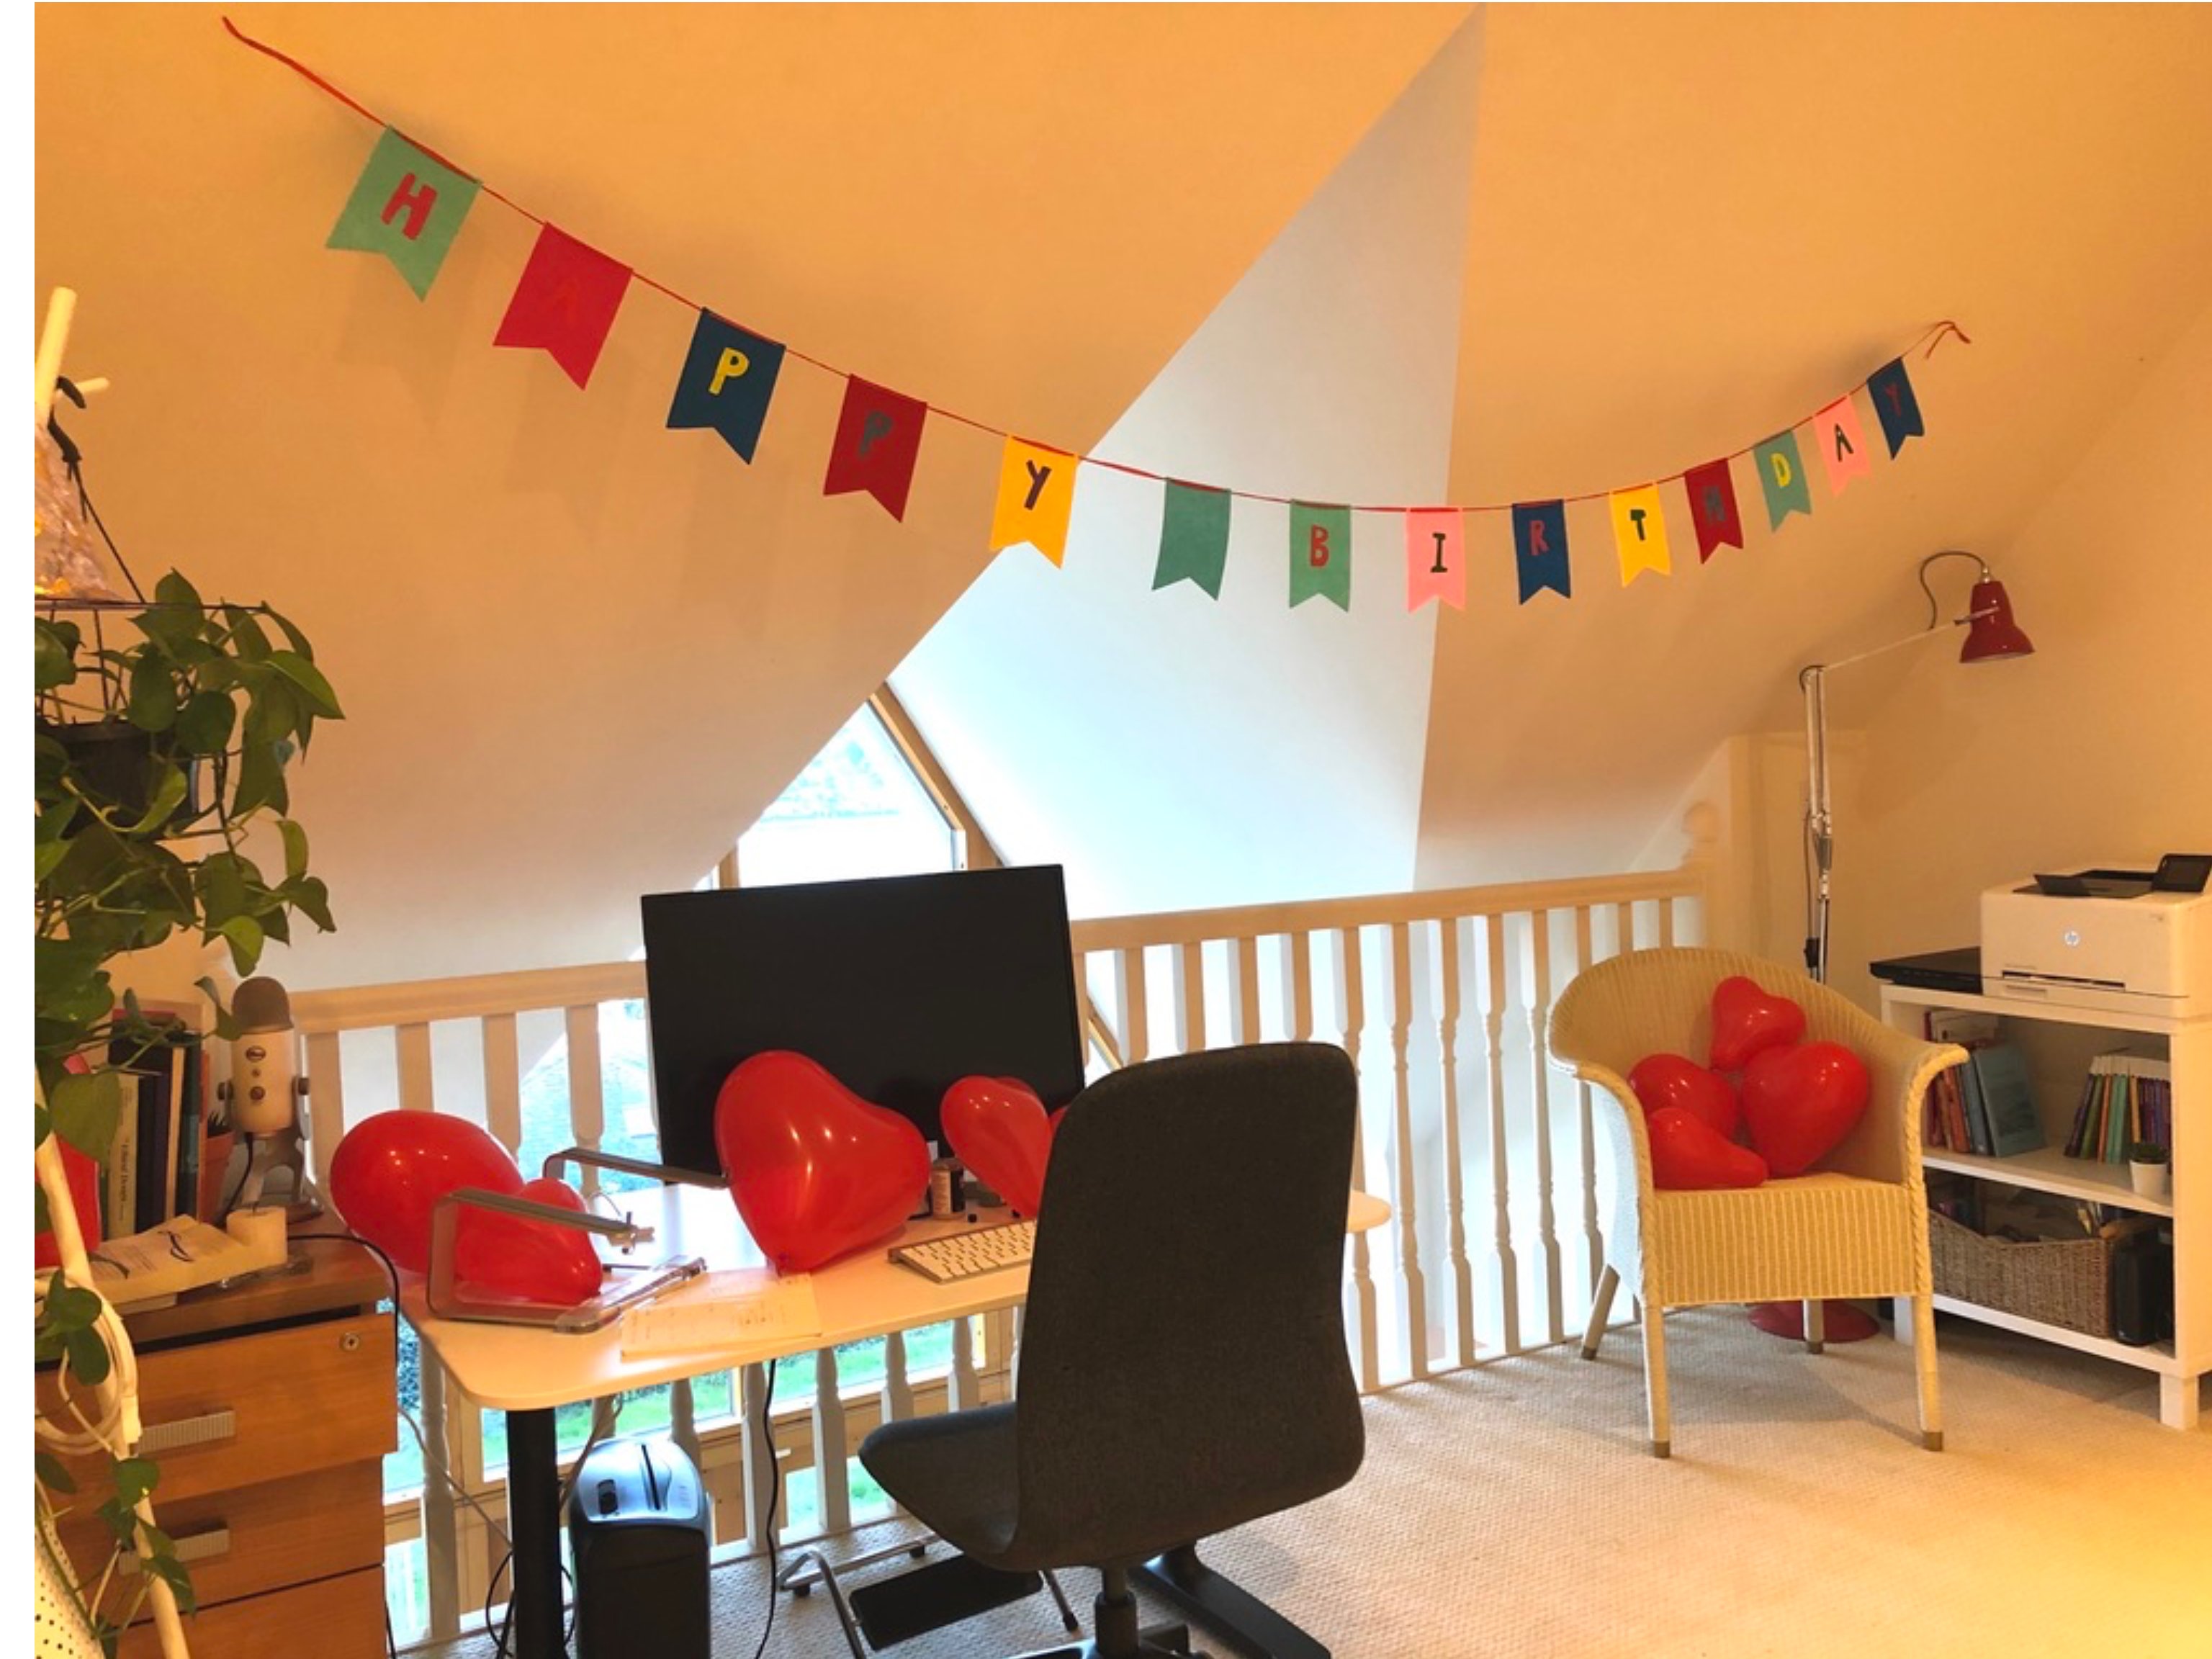 My home office decorated with a happy birthday banner and red heart balloons.